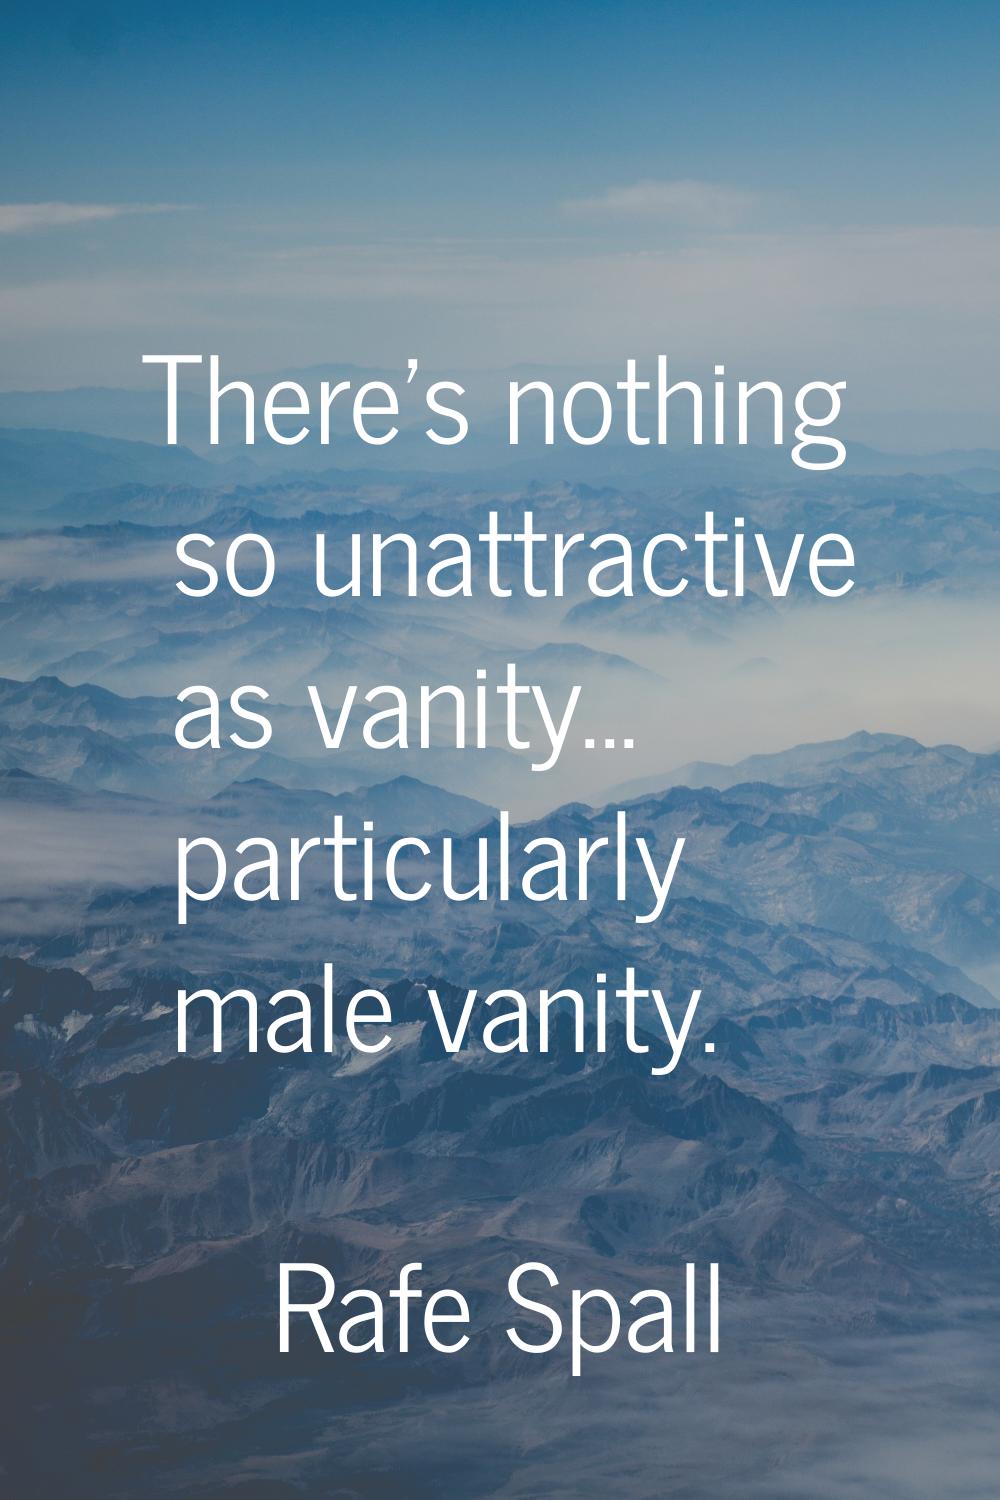 There's nothing so unattractive as vanity... particularly male vanity.